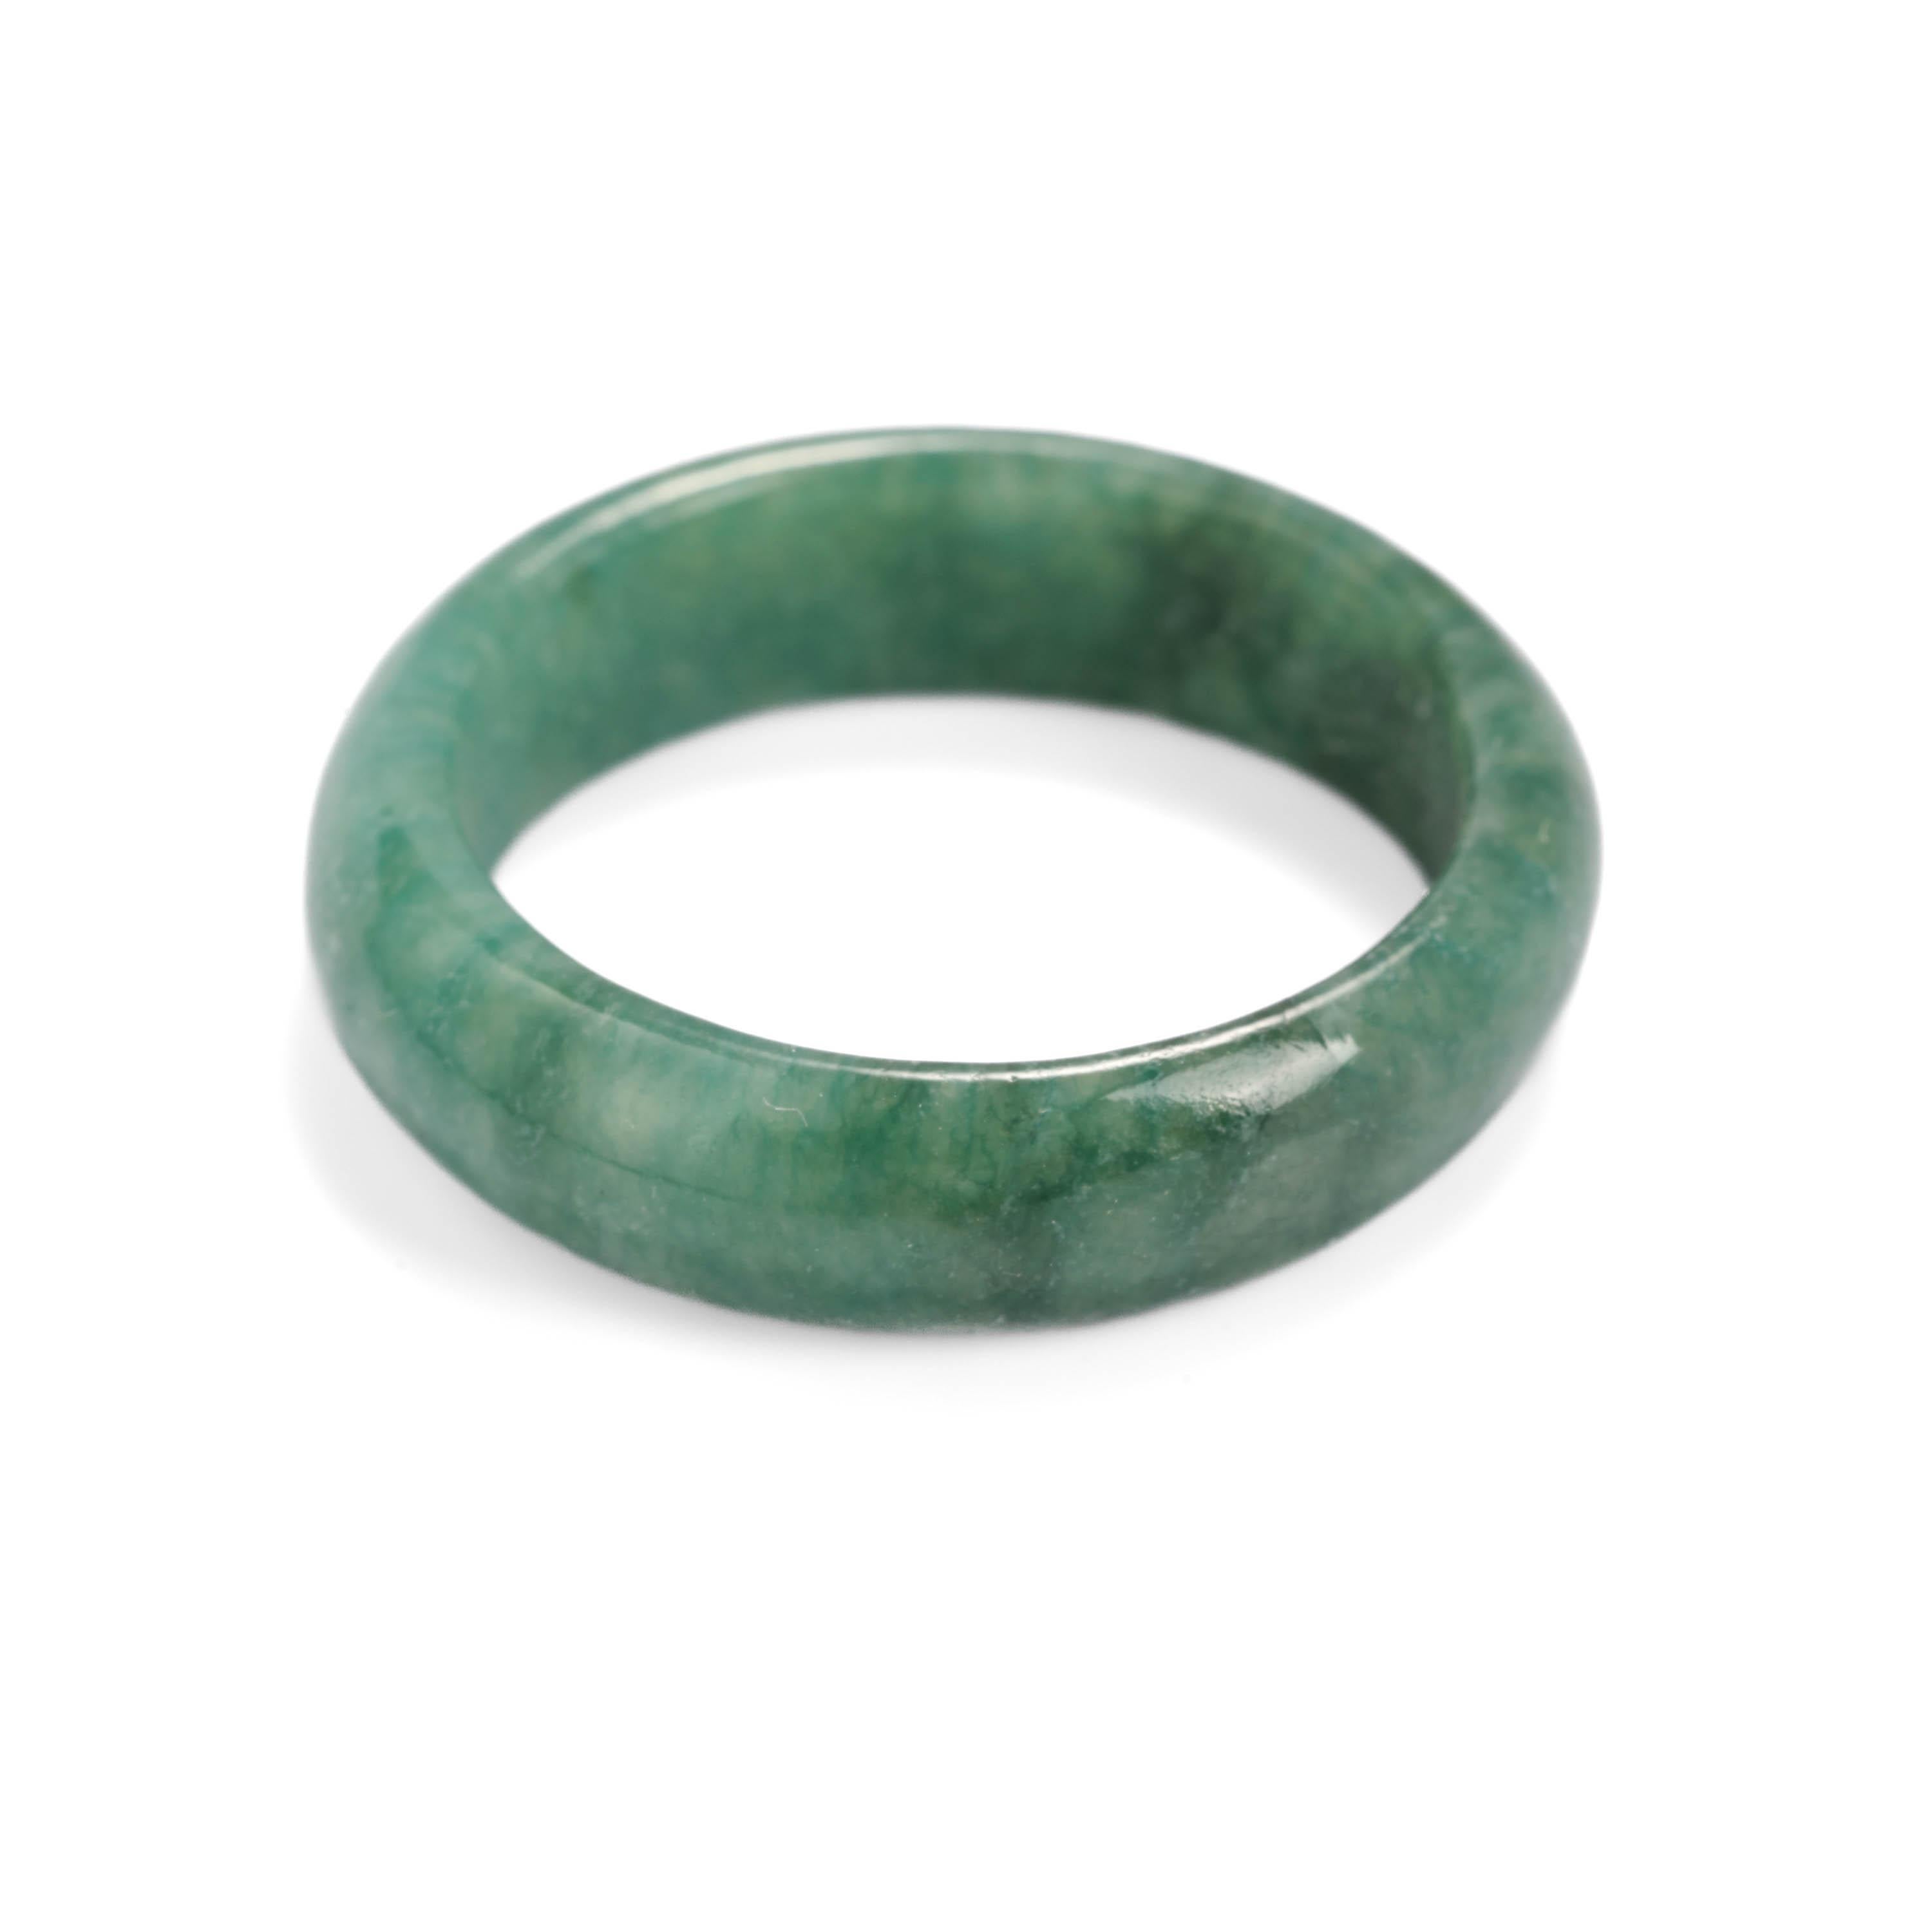 Rich green with a hint of blue -just like the finest emeralds from the legendary mines of Colombia, this is a rare find, indeed. A hand-carved band of pure, natural and untreated jadeite jade. Slightly mottled and highly translucent, the band is